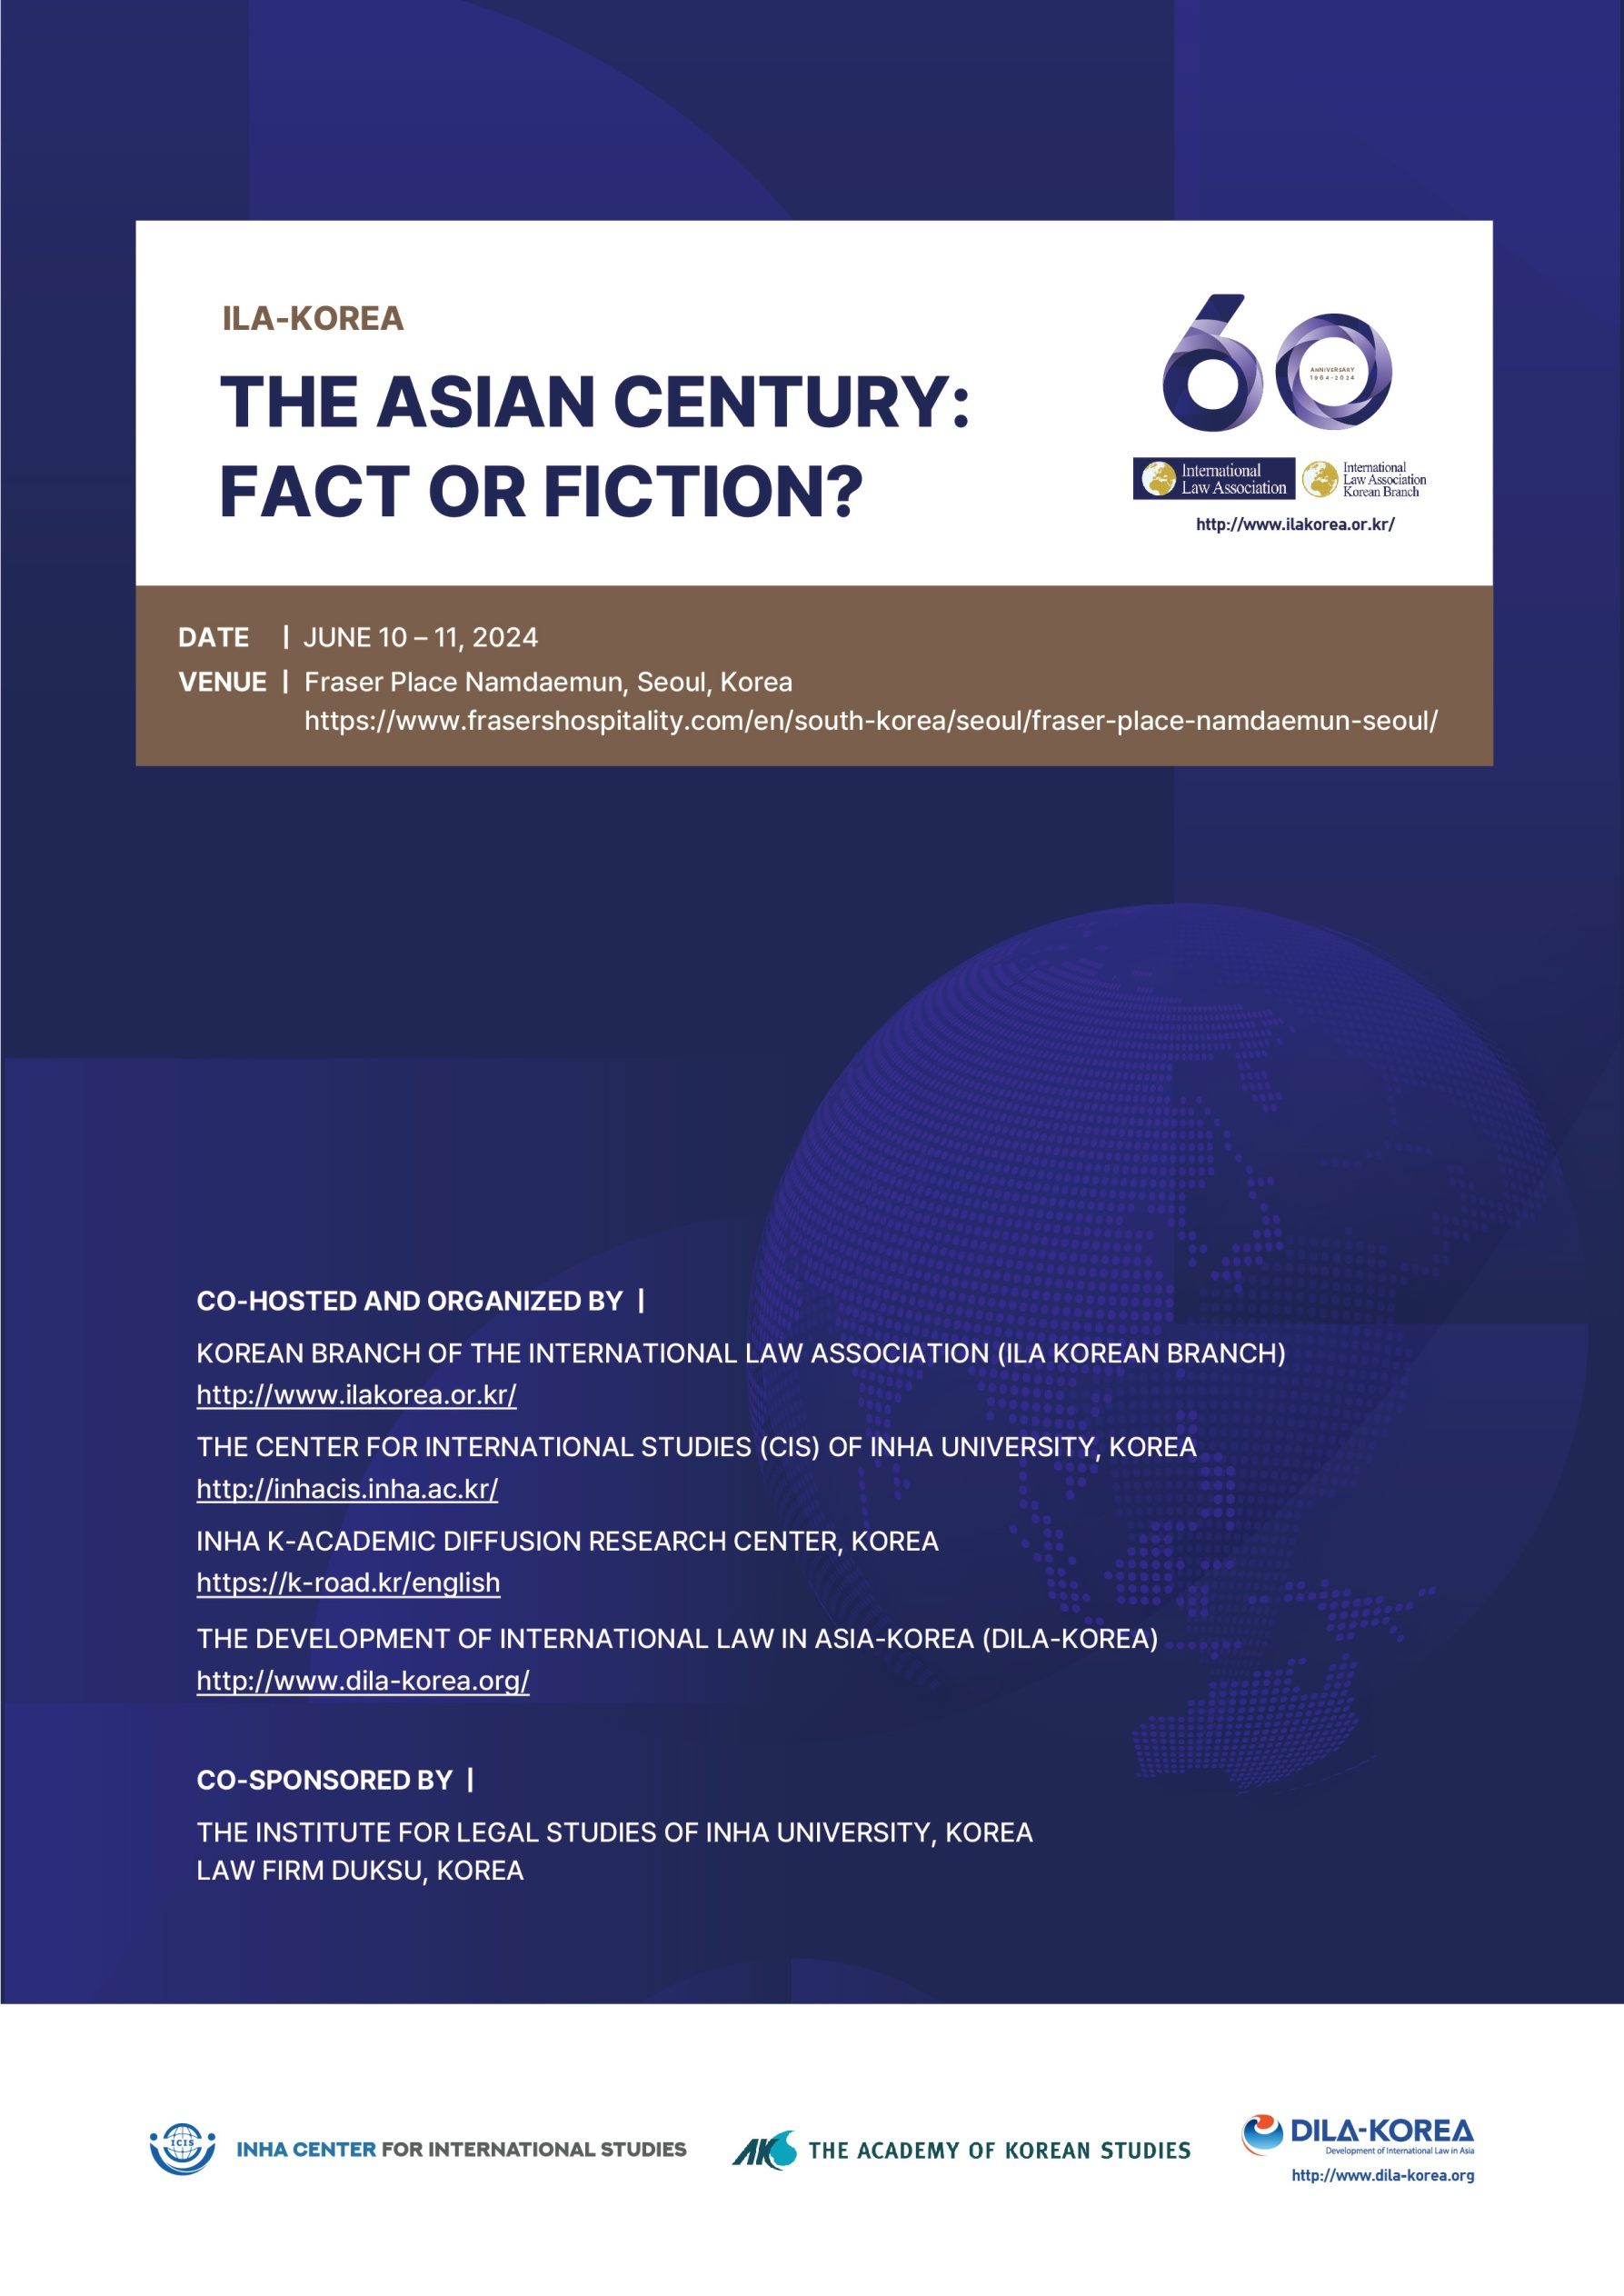 [Inha CIS] The Asian Century Fact or Fiction?                                 썸네일